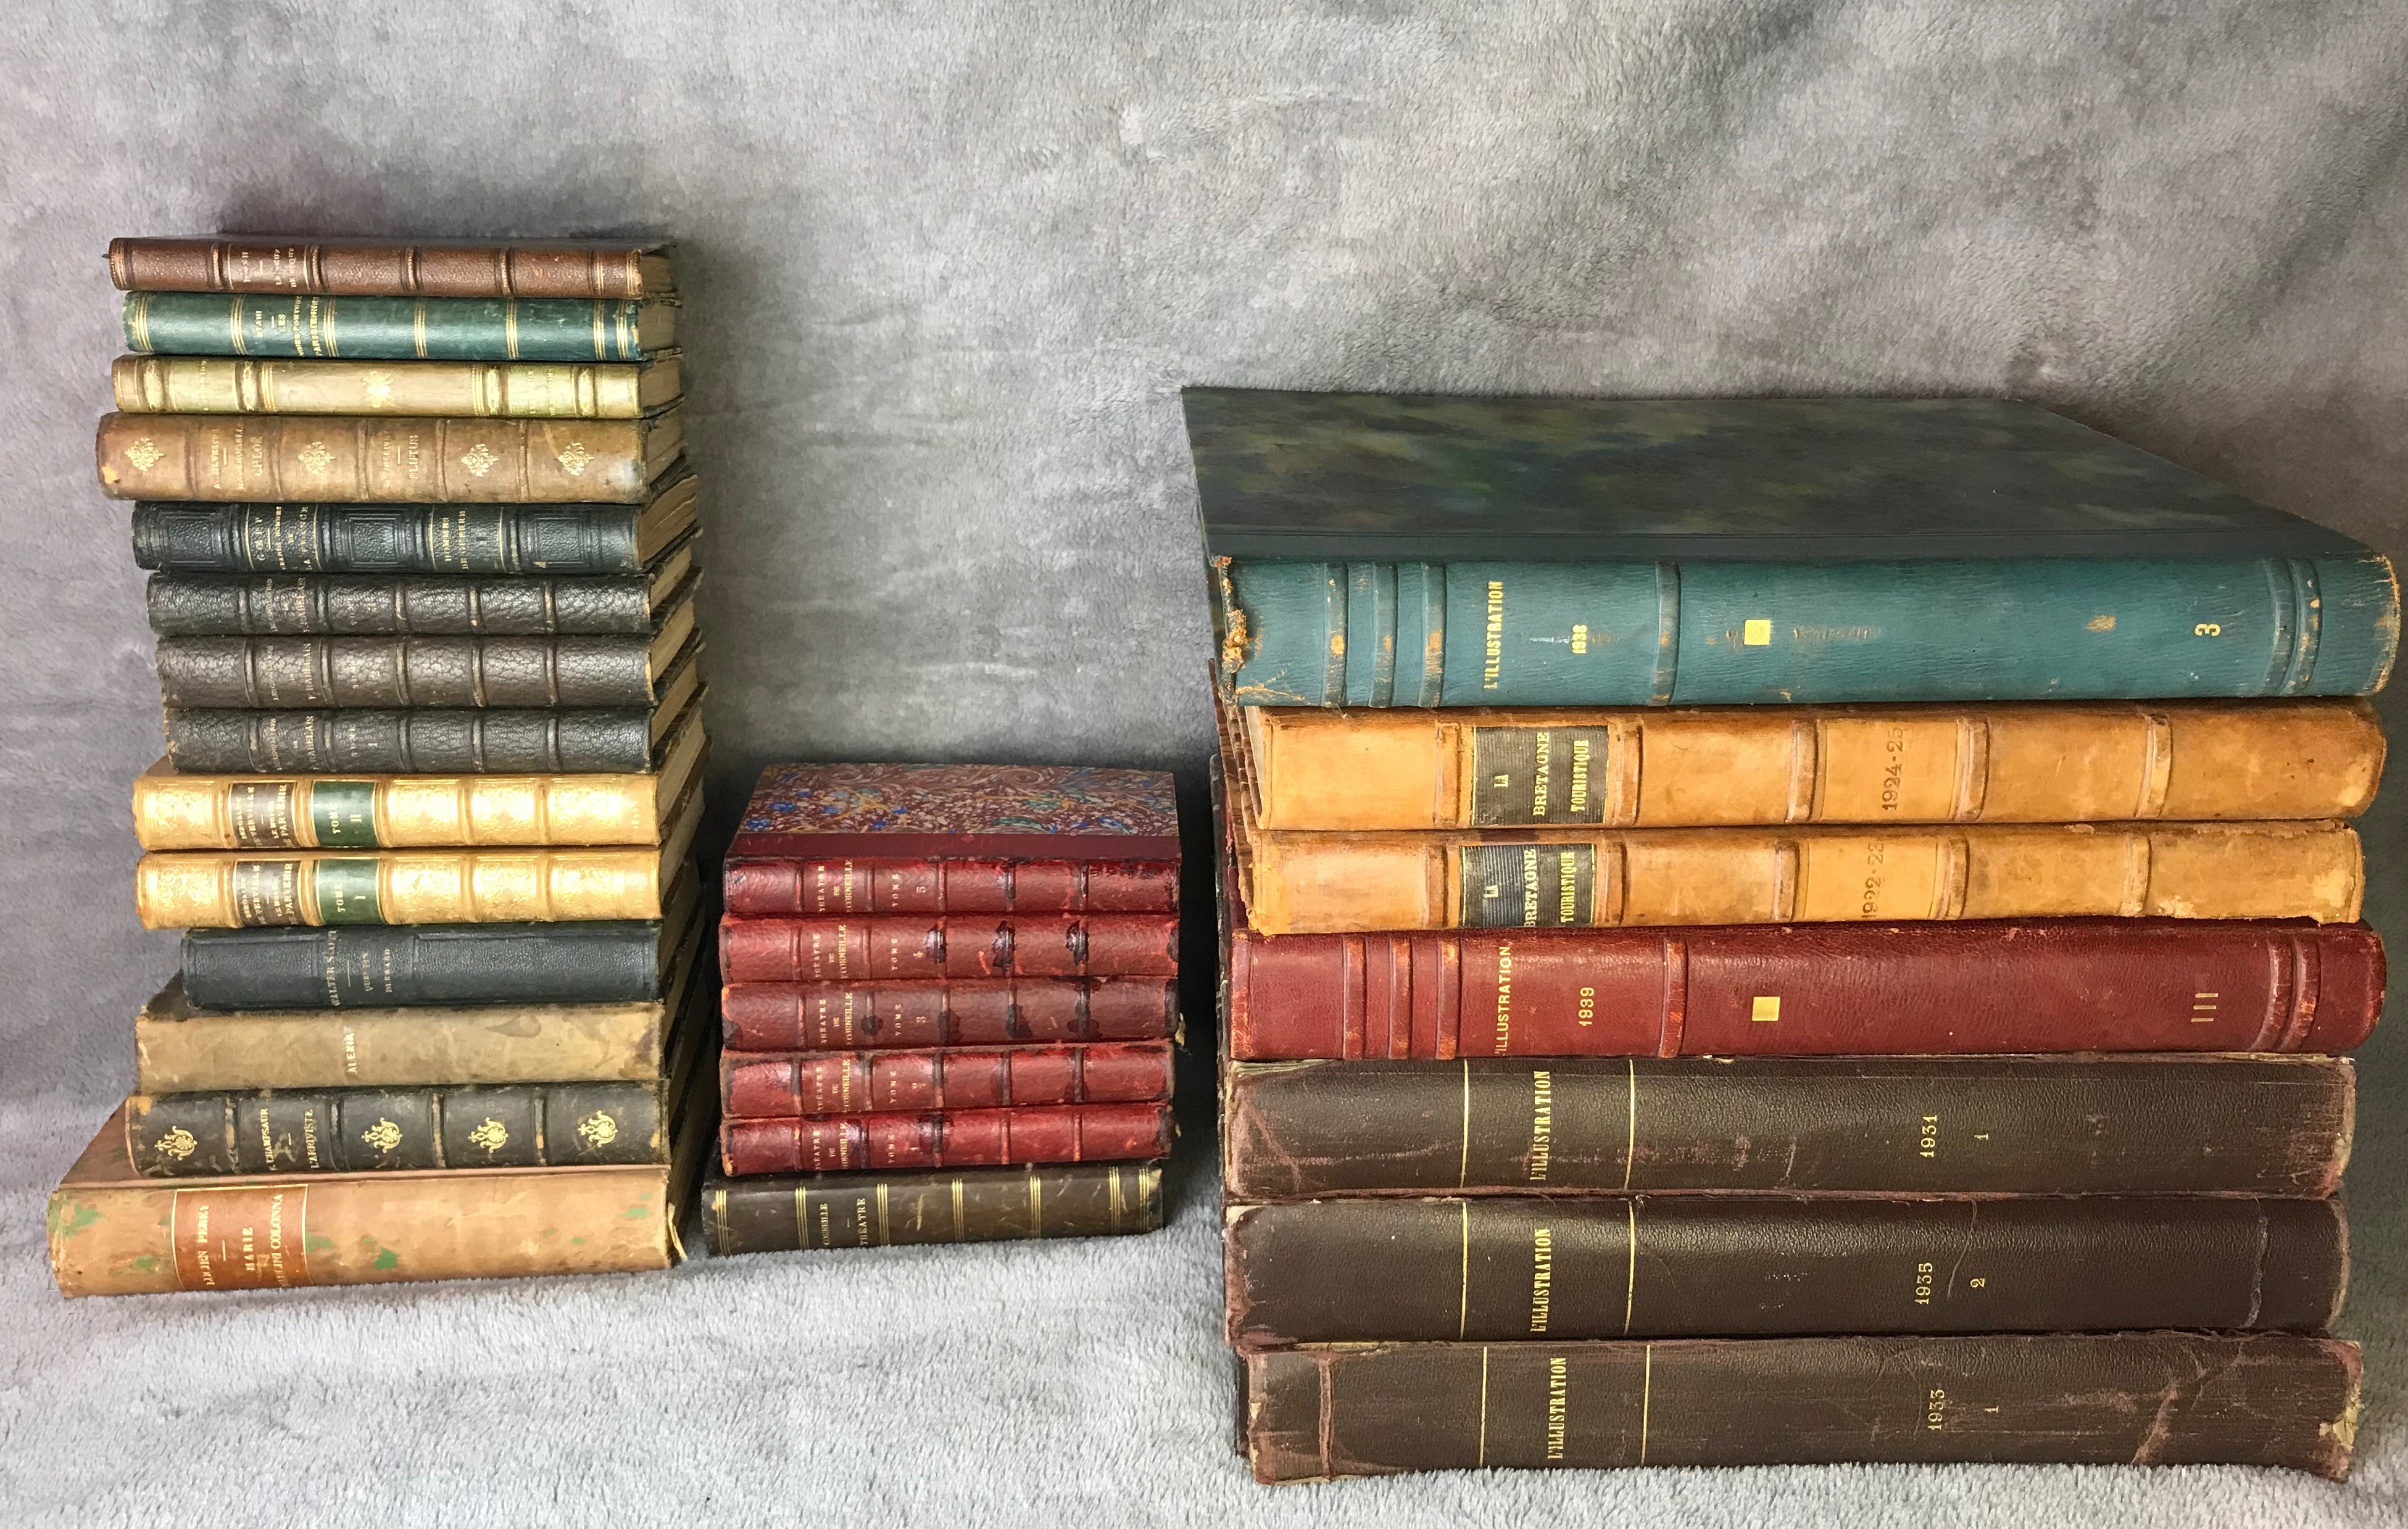 46 LEATHER BOUND BOOKS 46 LEATHER BOUND